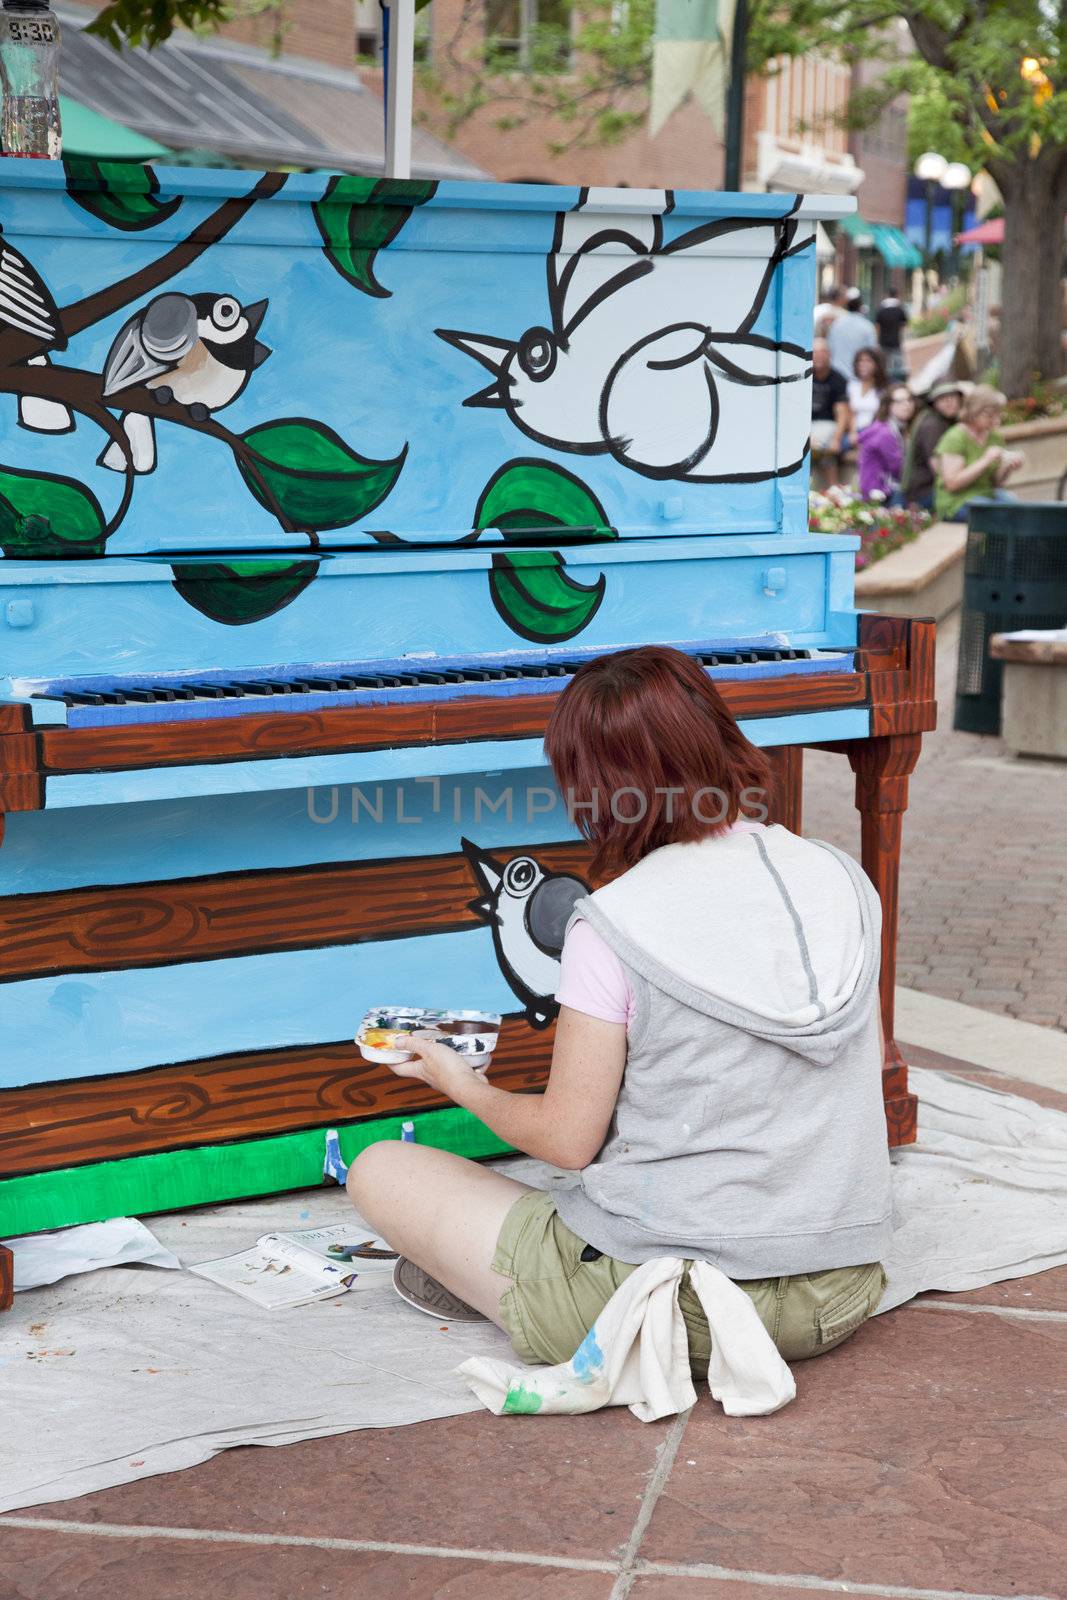 FORT COLLINS, COLORADO, USA - JUNE 18, 2011: Artist Ren Burke is painting a mural on the piano in Fort Collins Old Town Square as part of Pianos About Town public art program. June 18, 2011.